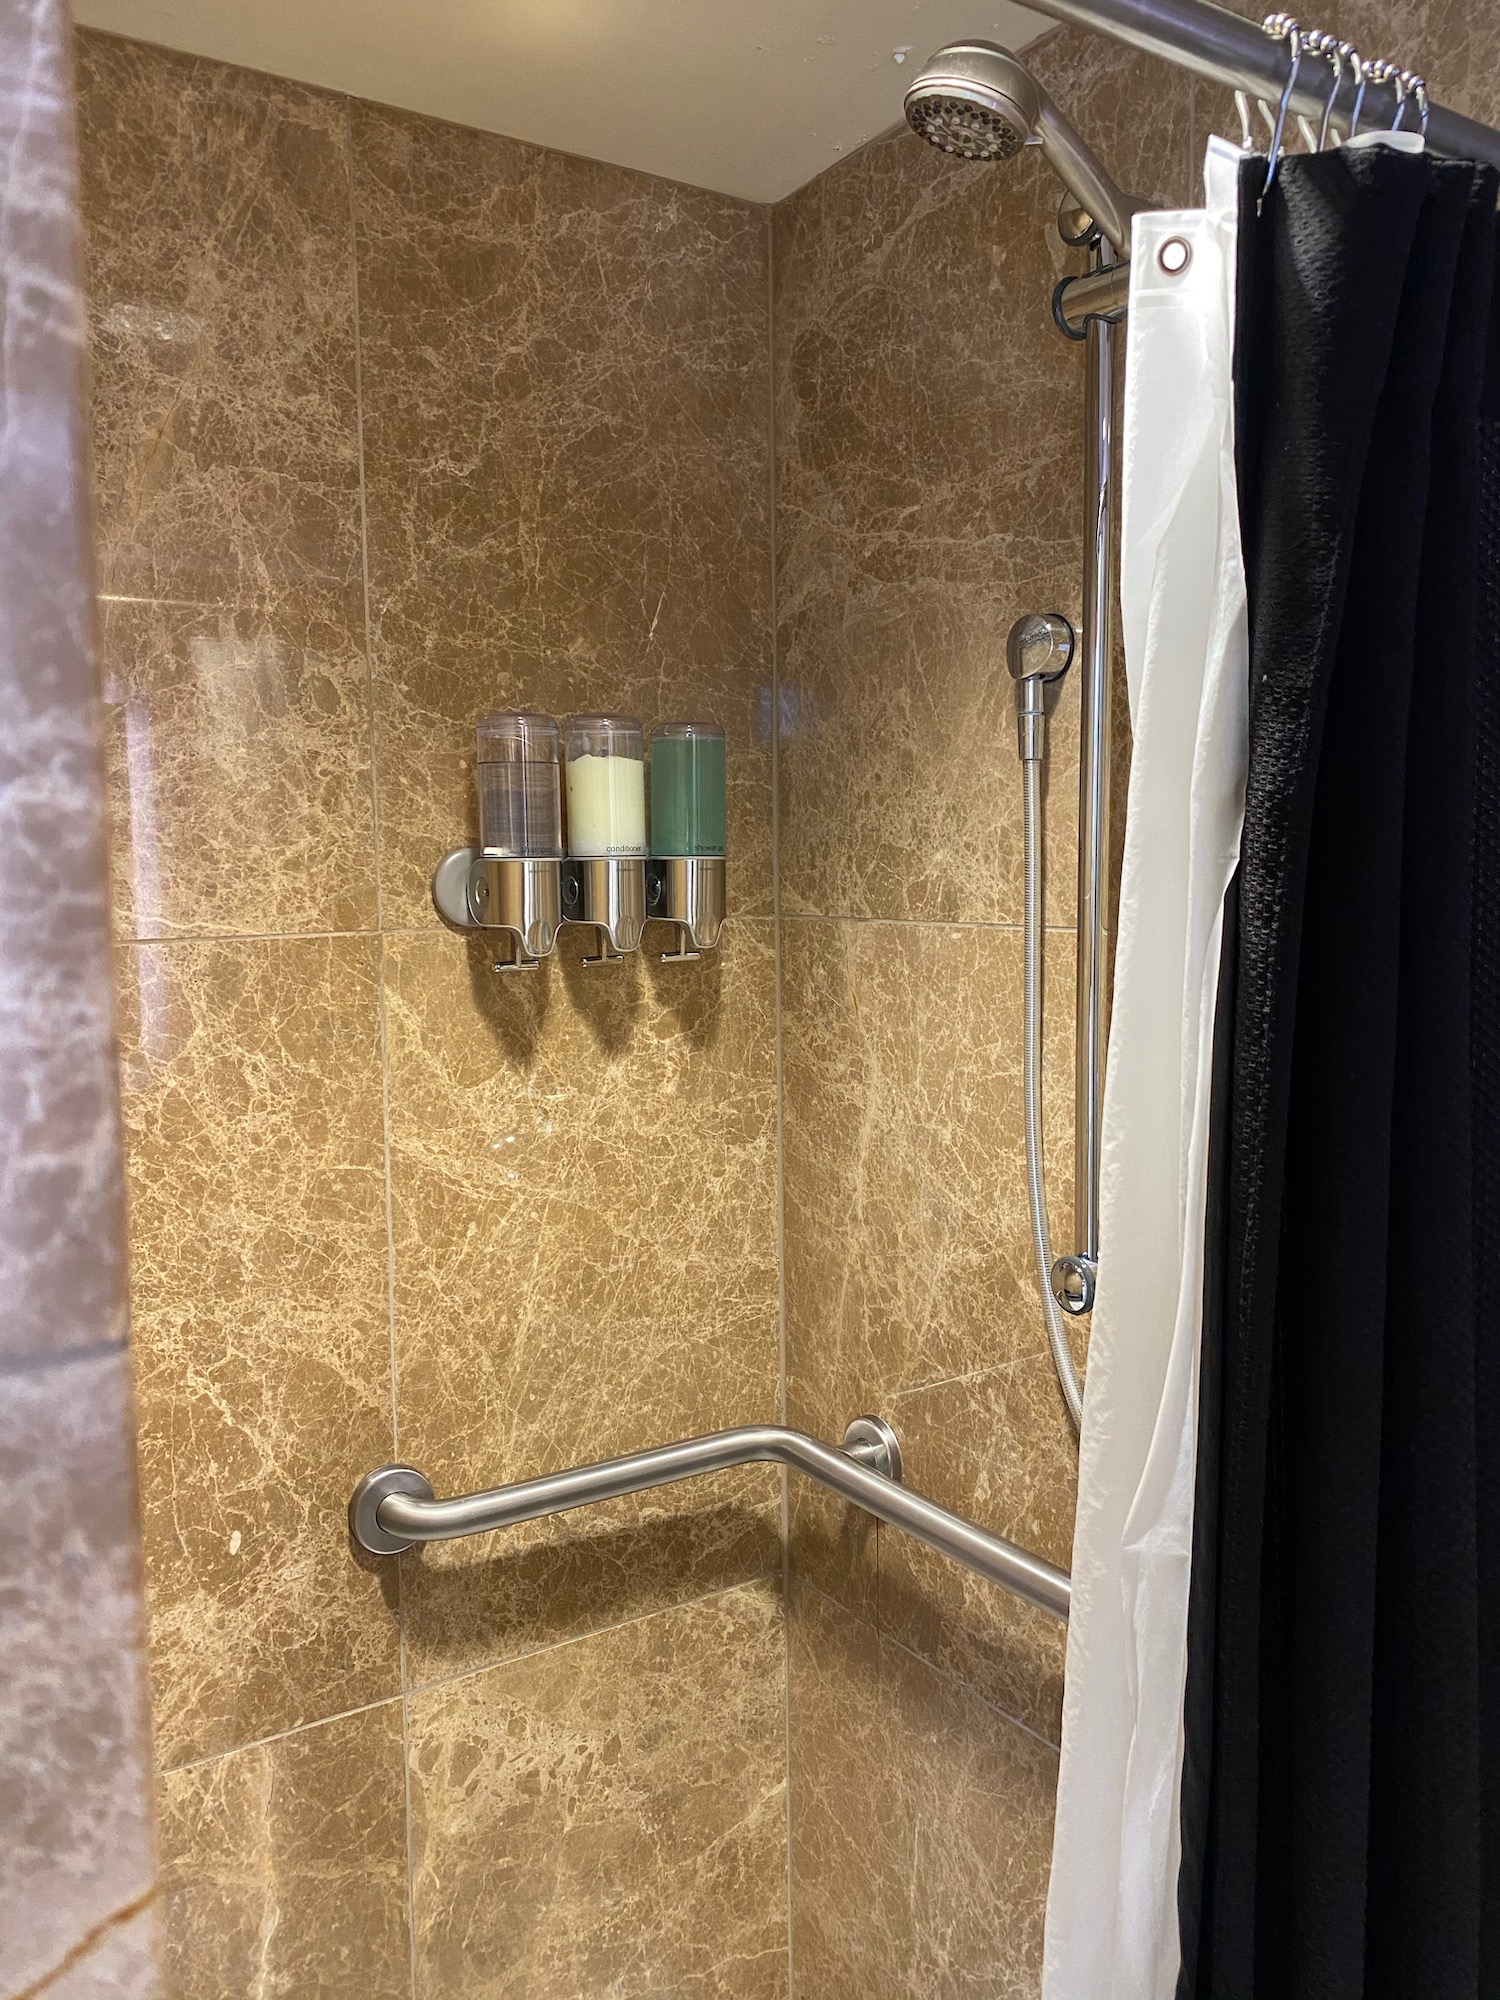 a shower with soap dispensers and shower curtain